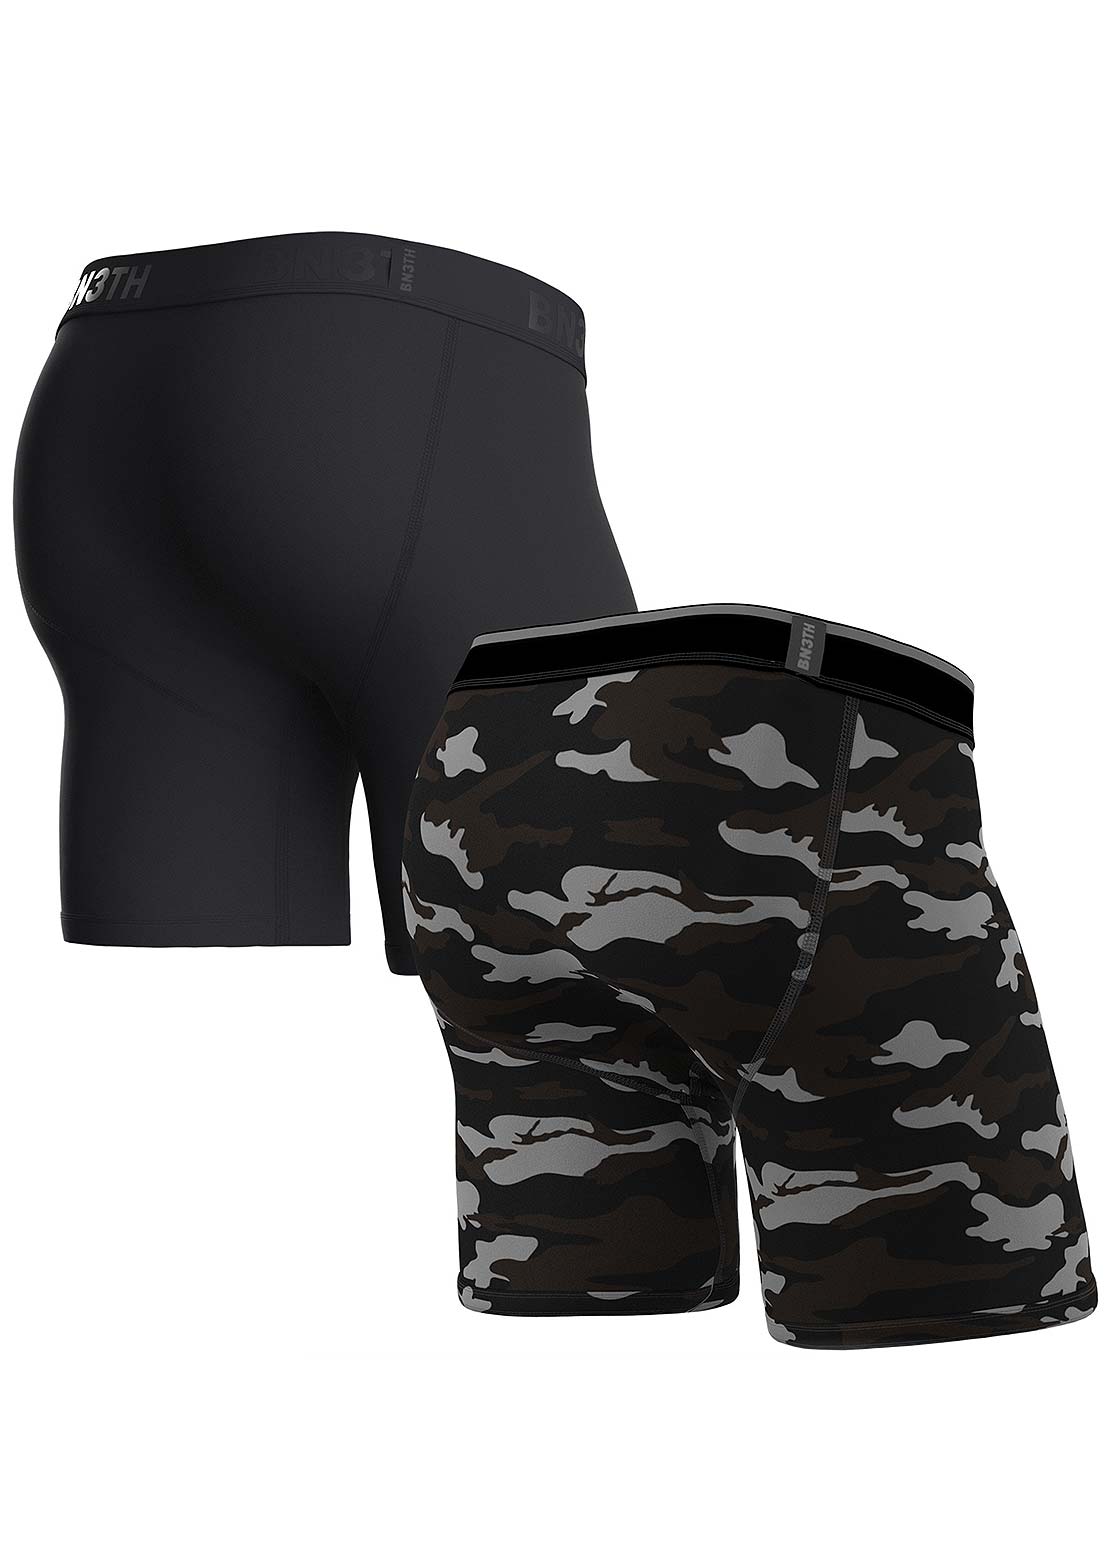 BN3TH Men&#39;s Classic Brief Boxers - 2 Pack Black/Covert Camo 2 Pack